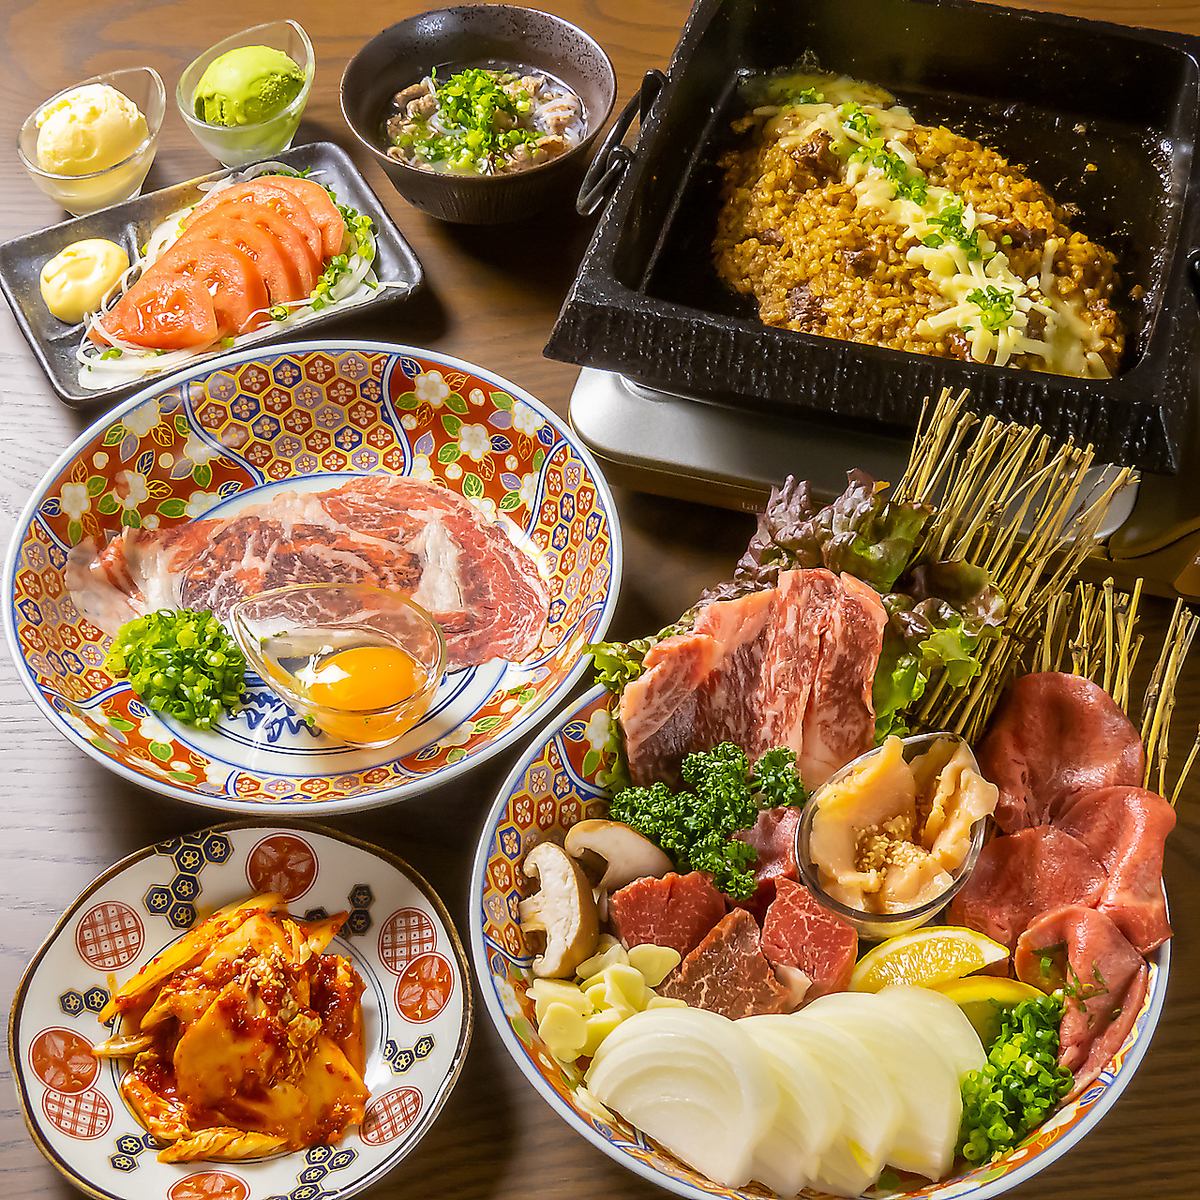 We also have hotpot dishes such as sukiyaki made with carefully selected Japanese beef!